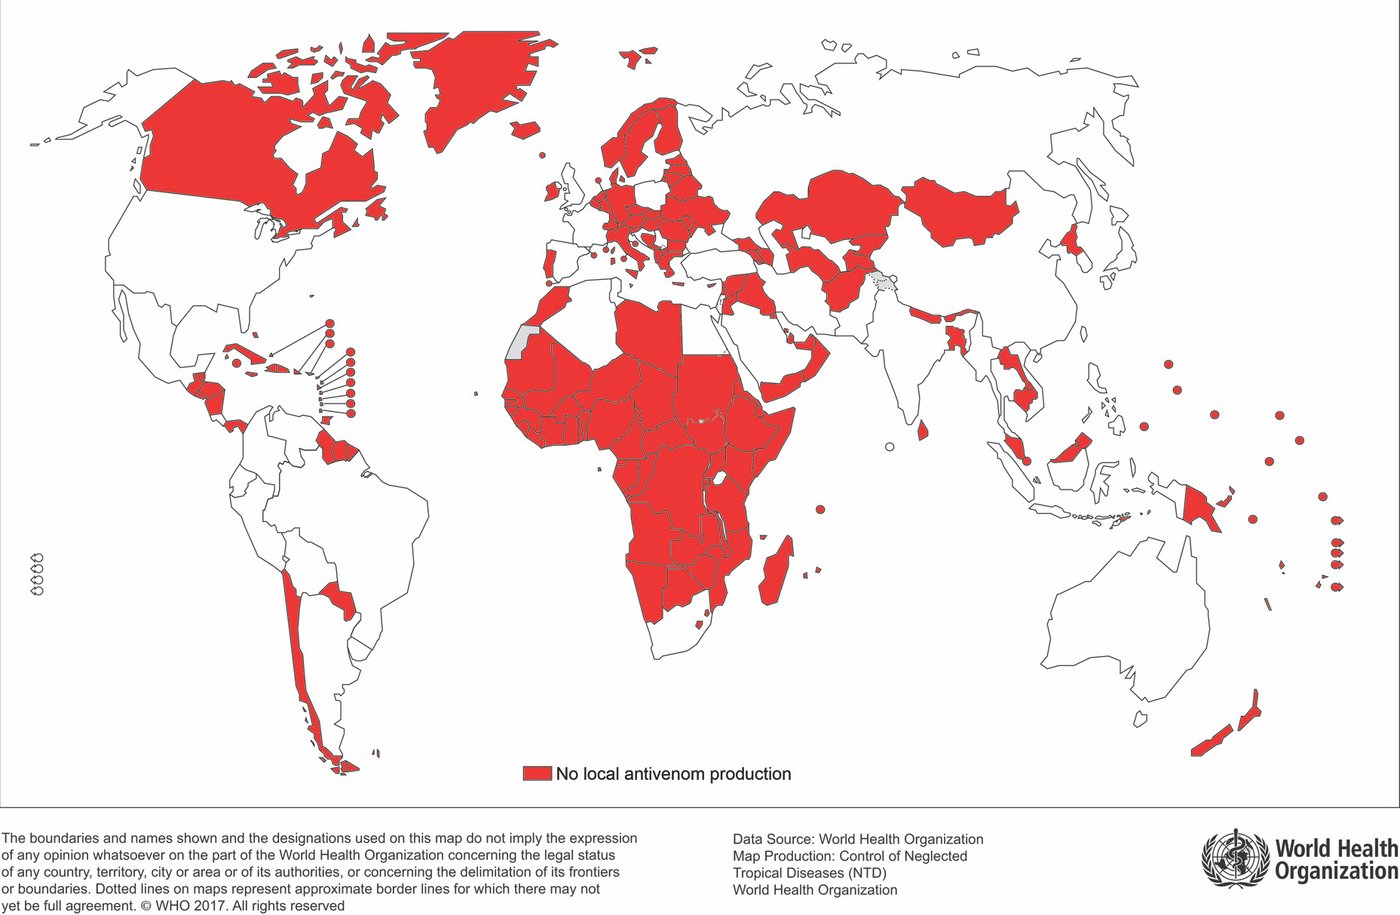 The image shows a white world map with country outlines. Some countries are coloured in red, these countries have no local antivenom production. Most of these countries are located on the African continent, but also in Europe, Middle-East, Asia and Central America.